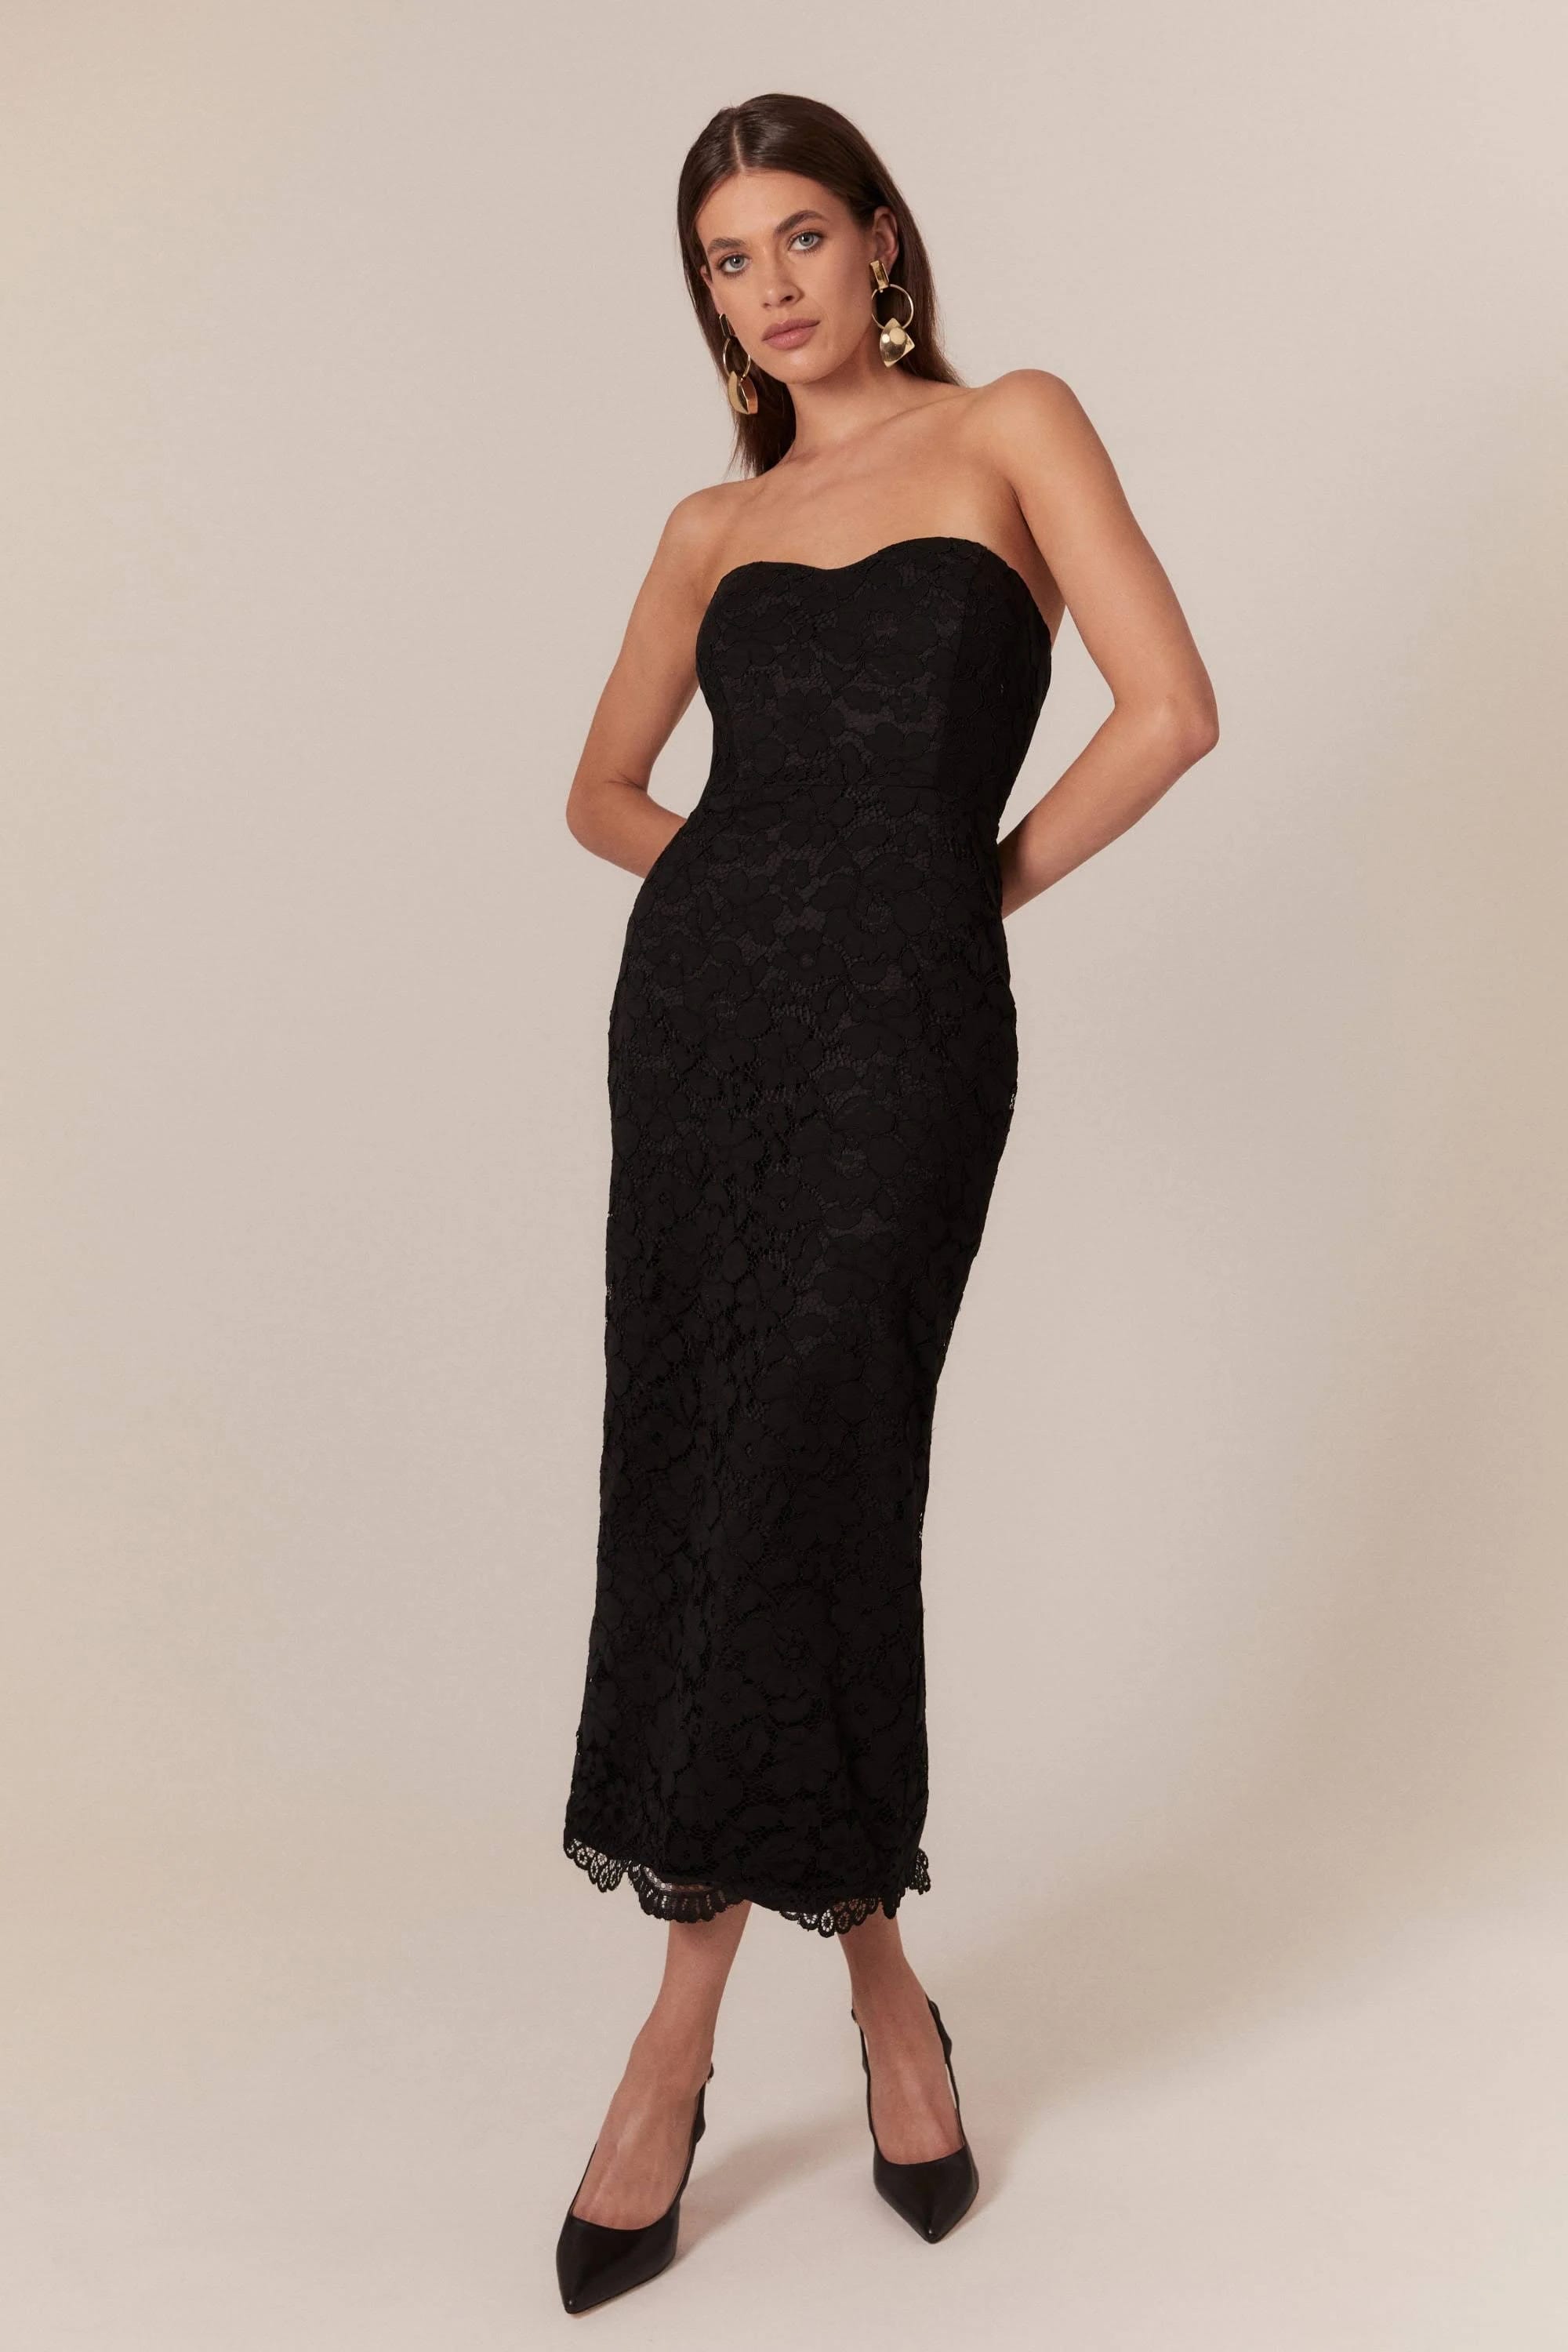 Elegant Lace Midi Dress with Sweetheart Neckline and Detachable Straps | Image